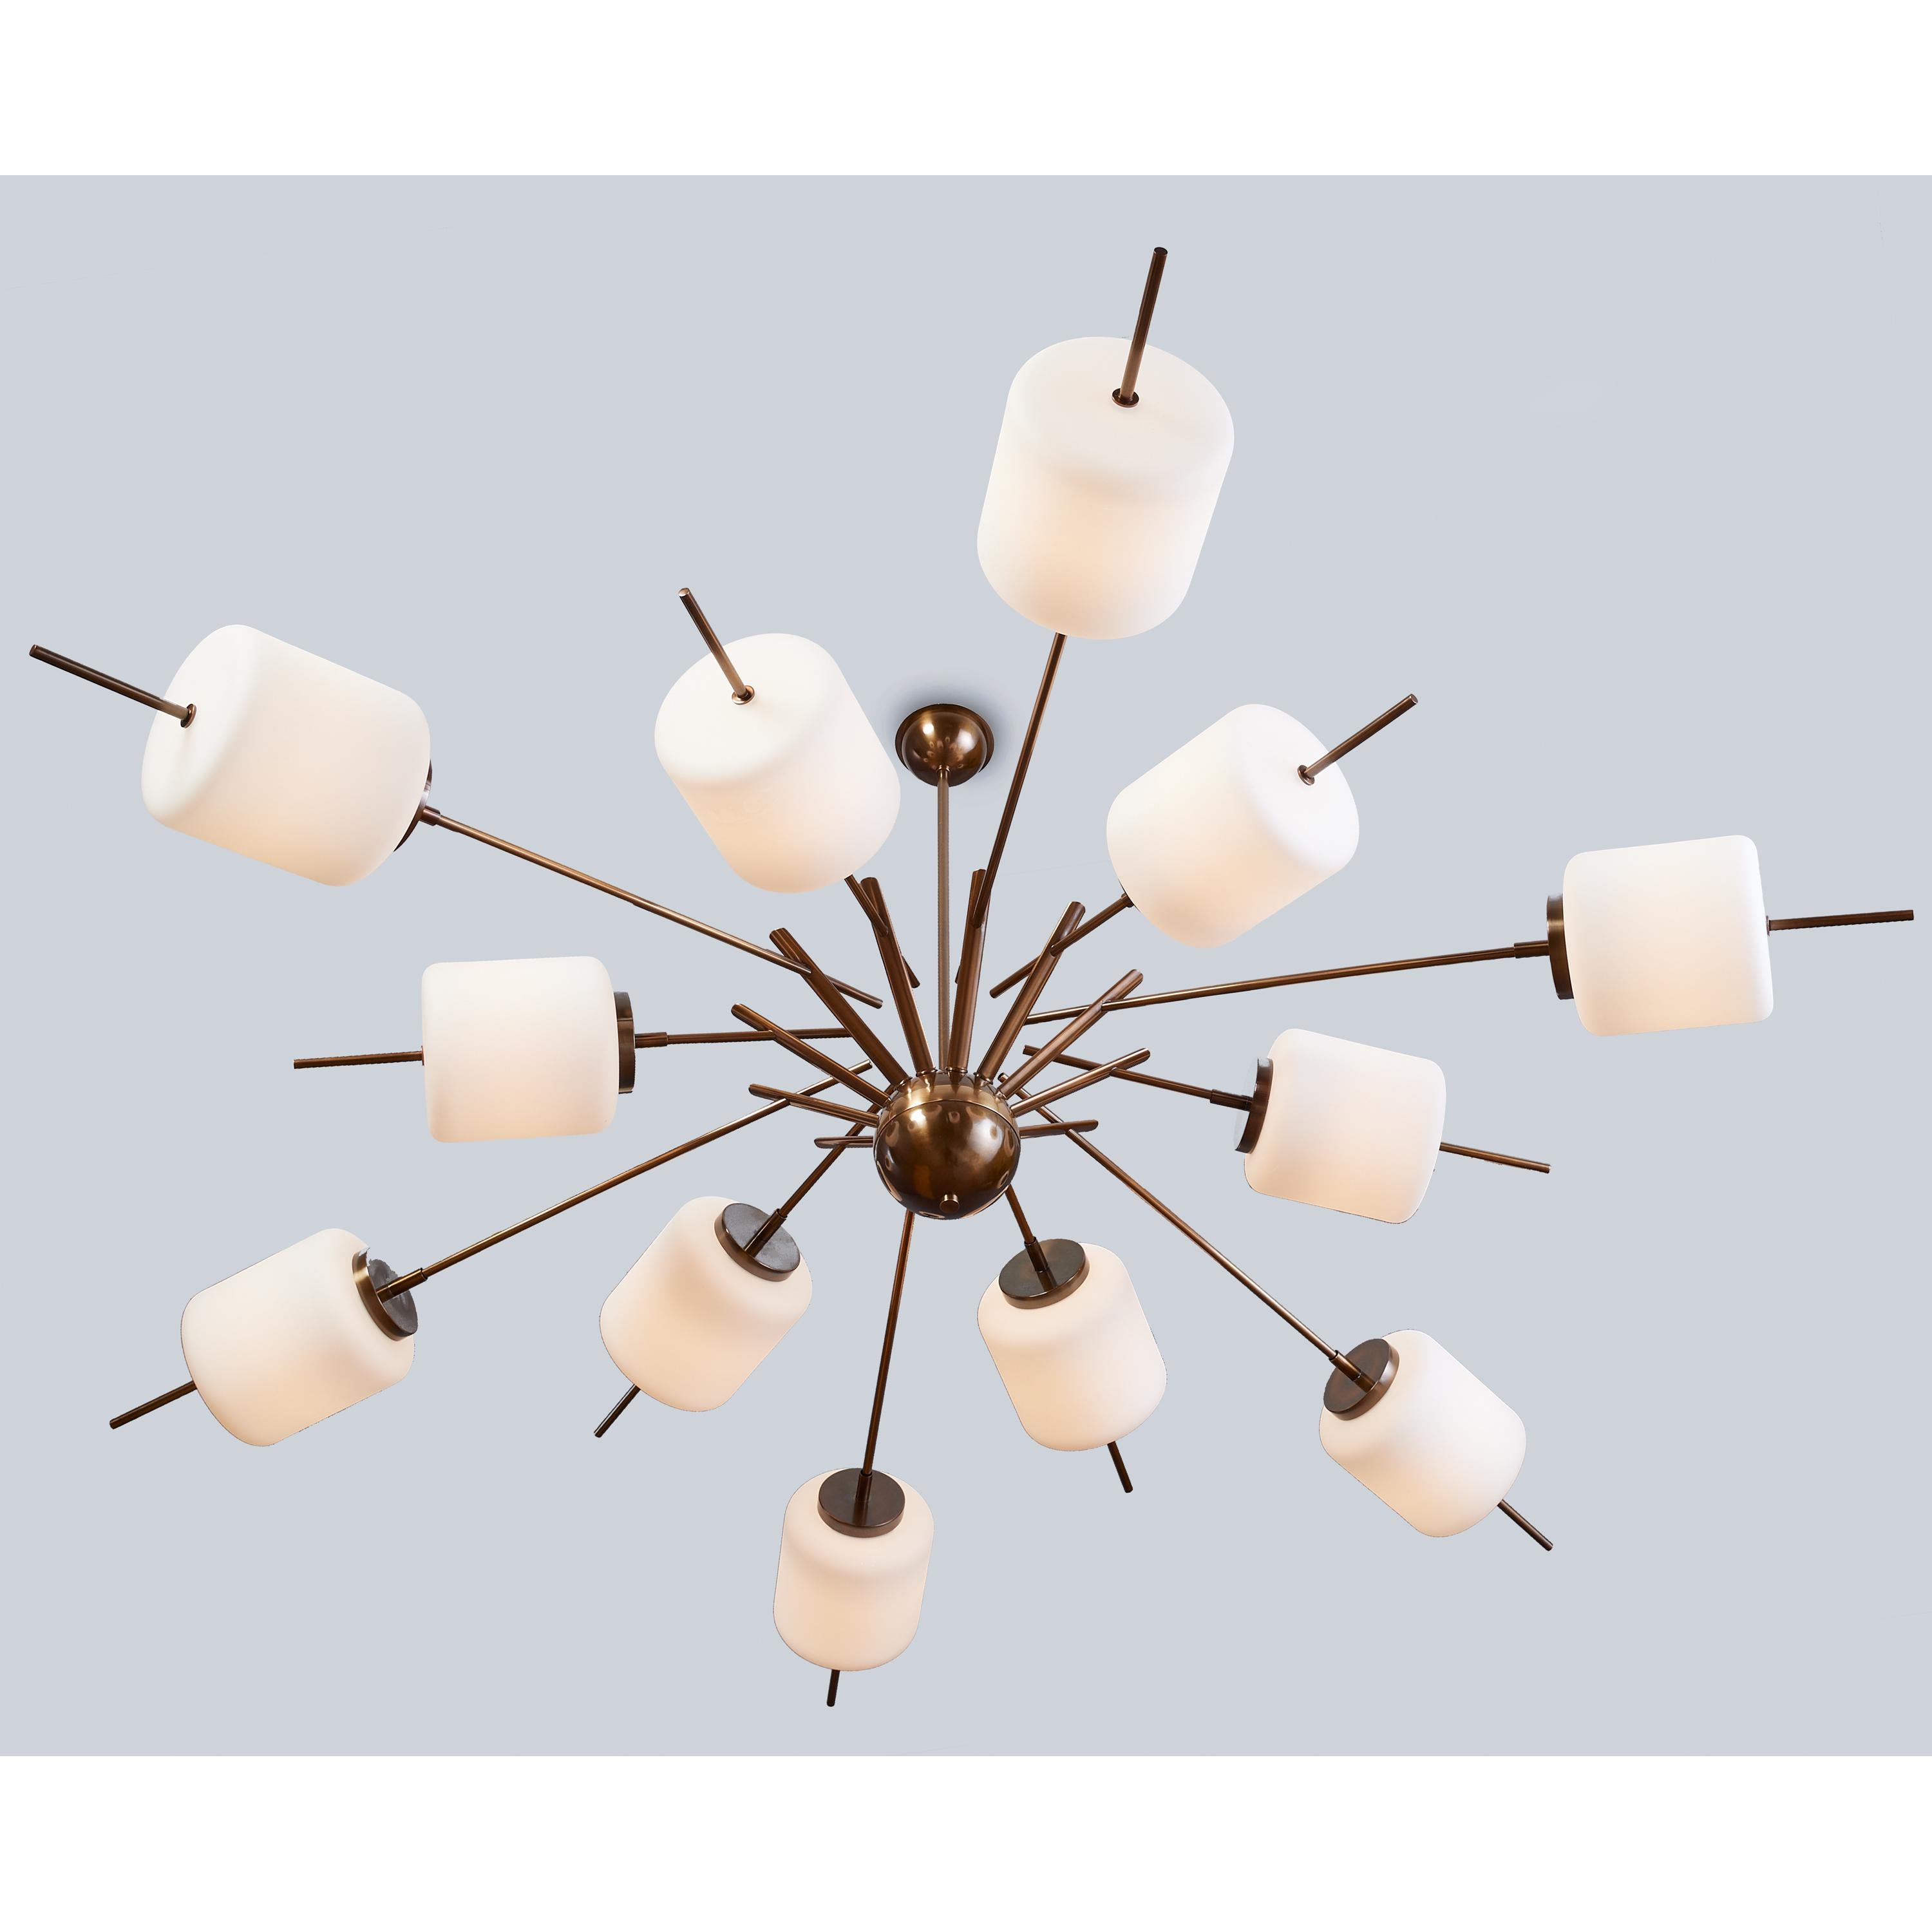 Italy, 1960s
An important and spectacular twelve branch chandelier, 72